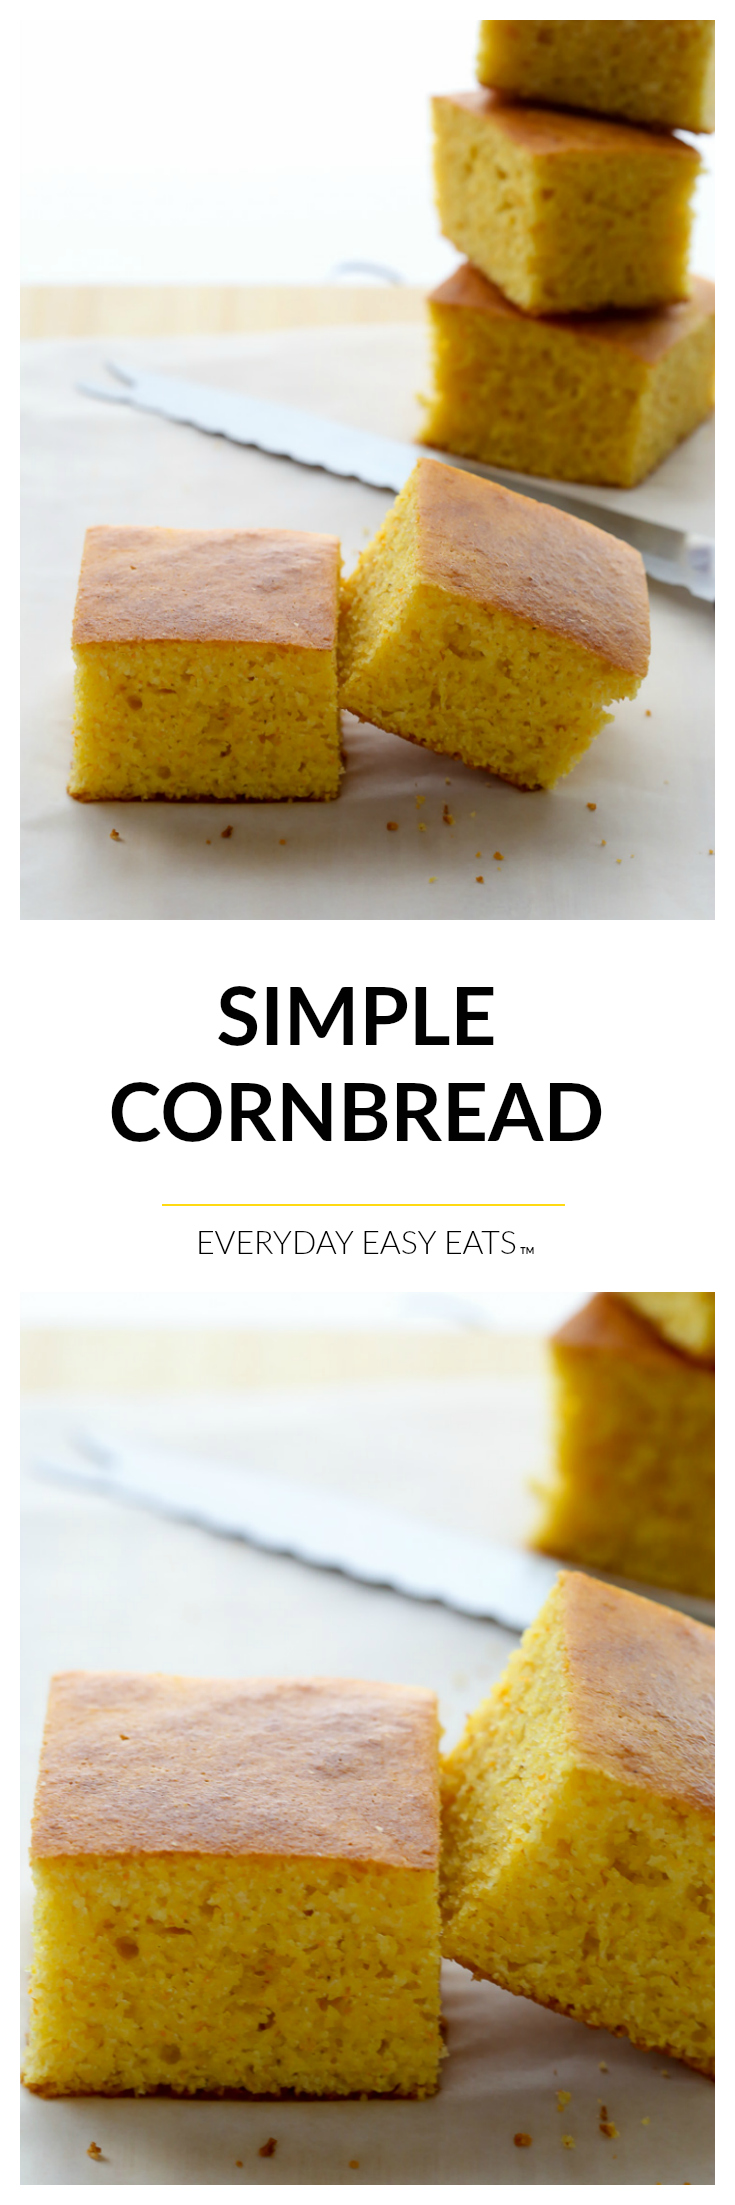 Simple Cornbread - A classic, lightly-sweet cornbread recipe that requires just 9 simple ingredients and 30 minutes to make. | EverydayEasyEats.com